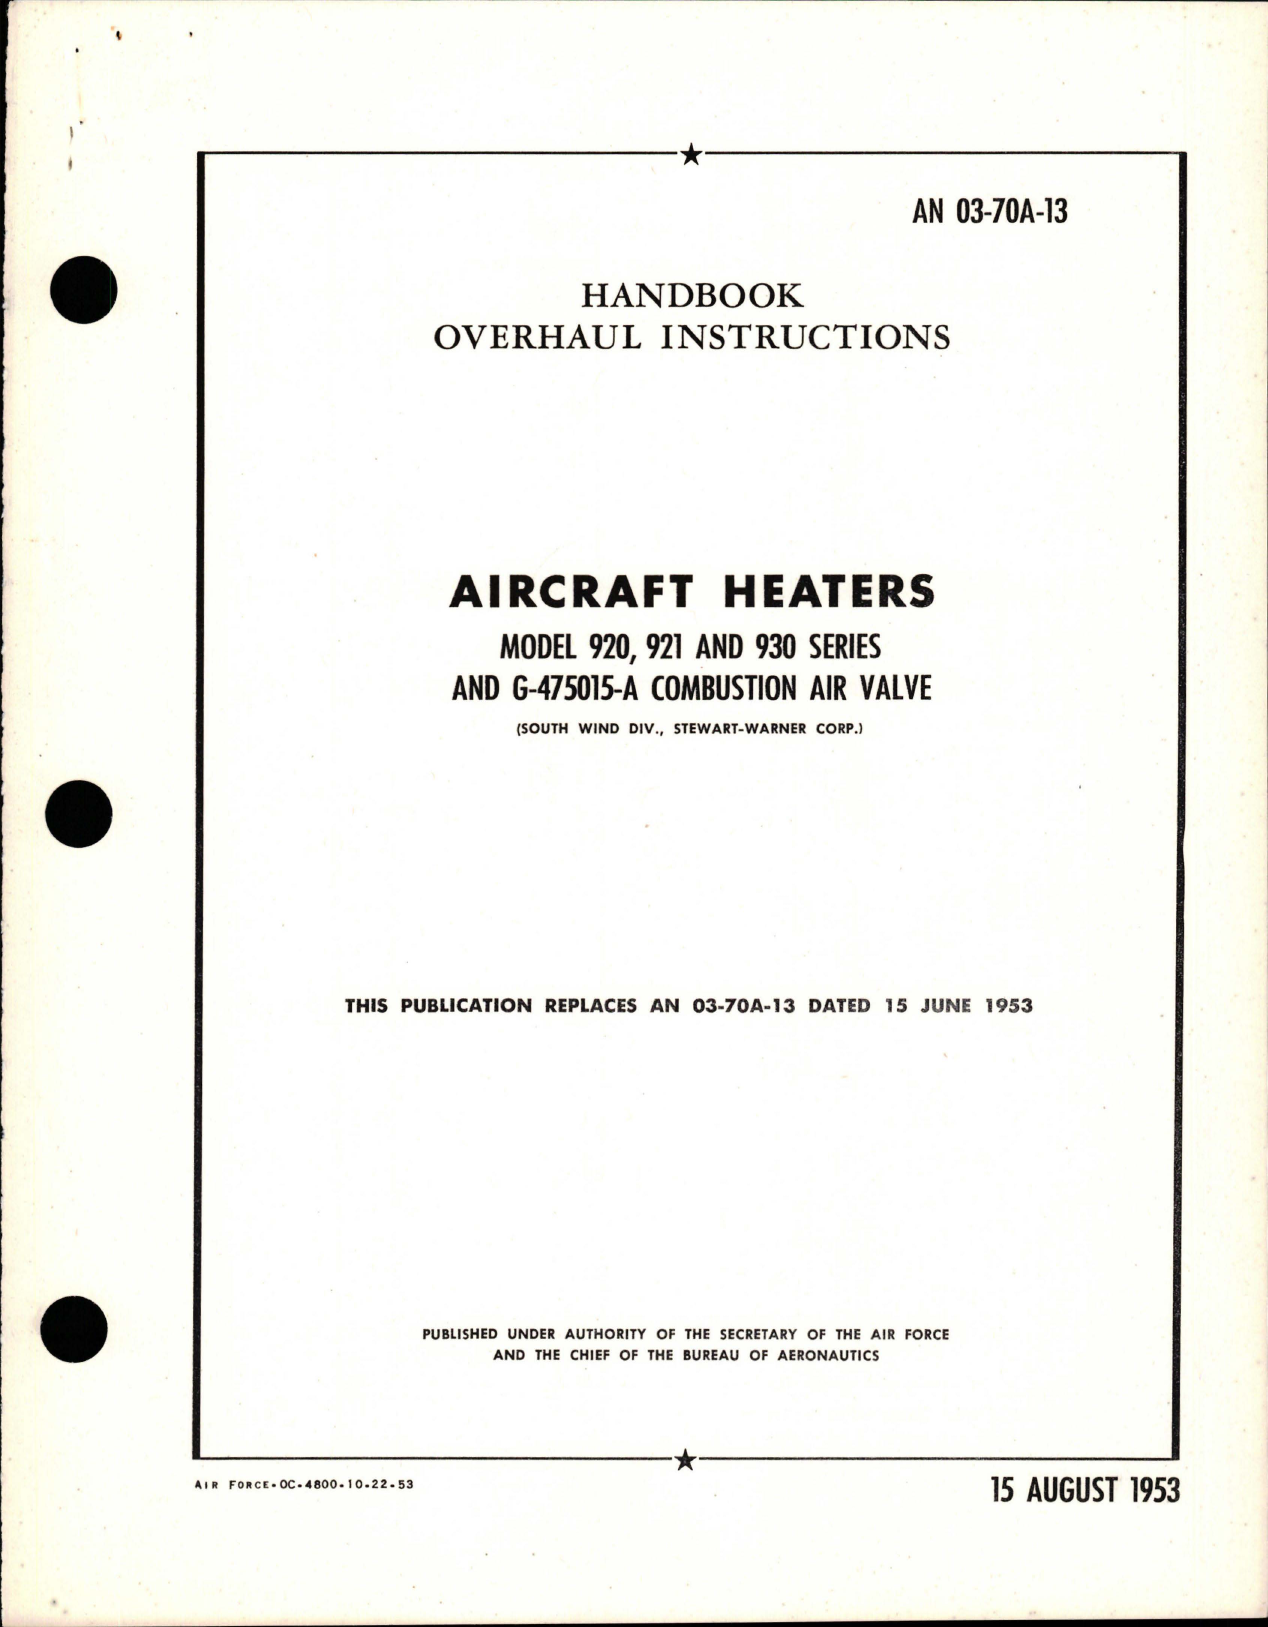 Sample page 1 from AirCorps Library document: Overhaul Instructions for Aircraft Heaters - Model 920, 921 and 930 Series